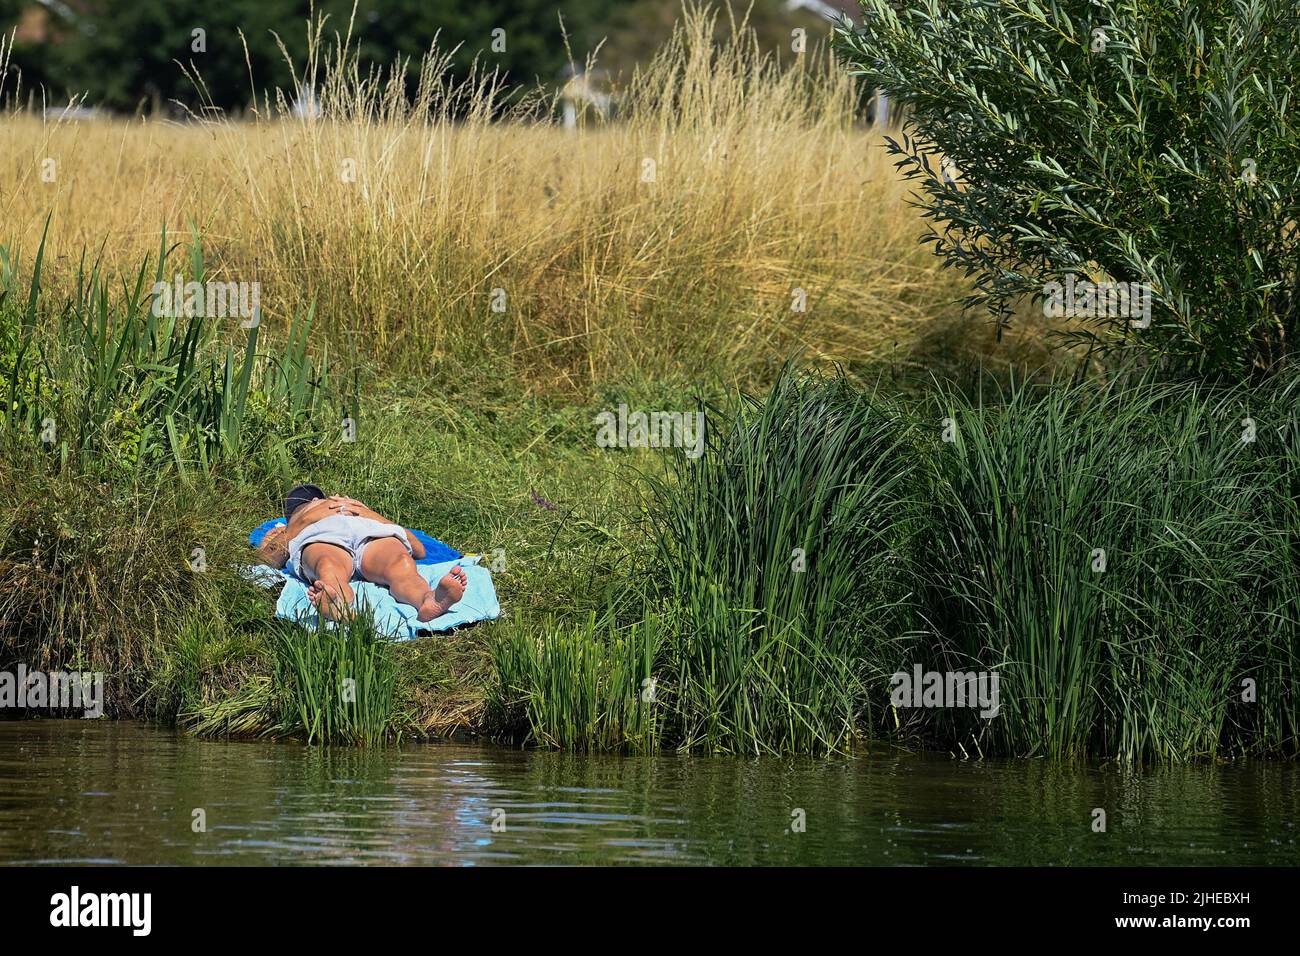 A person sunbathes next to the River Thames during the hot weather, near Windsor, Britain, July 18, 2022. REUTERS/Toby Melville Stock Photo